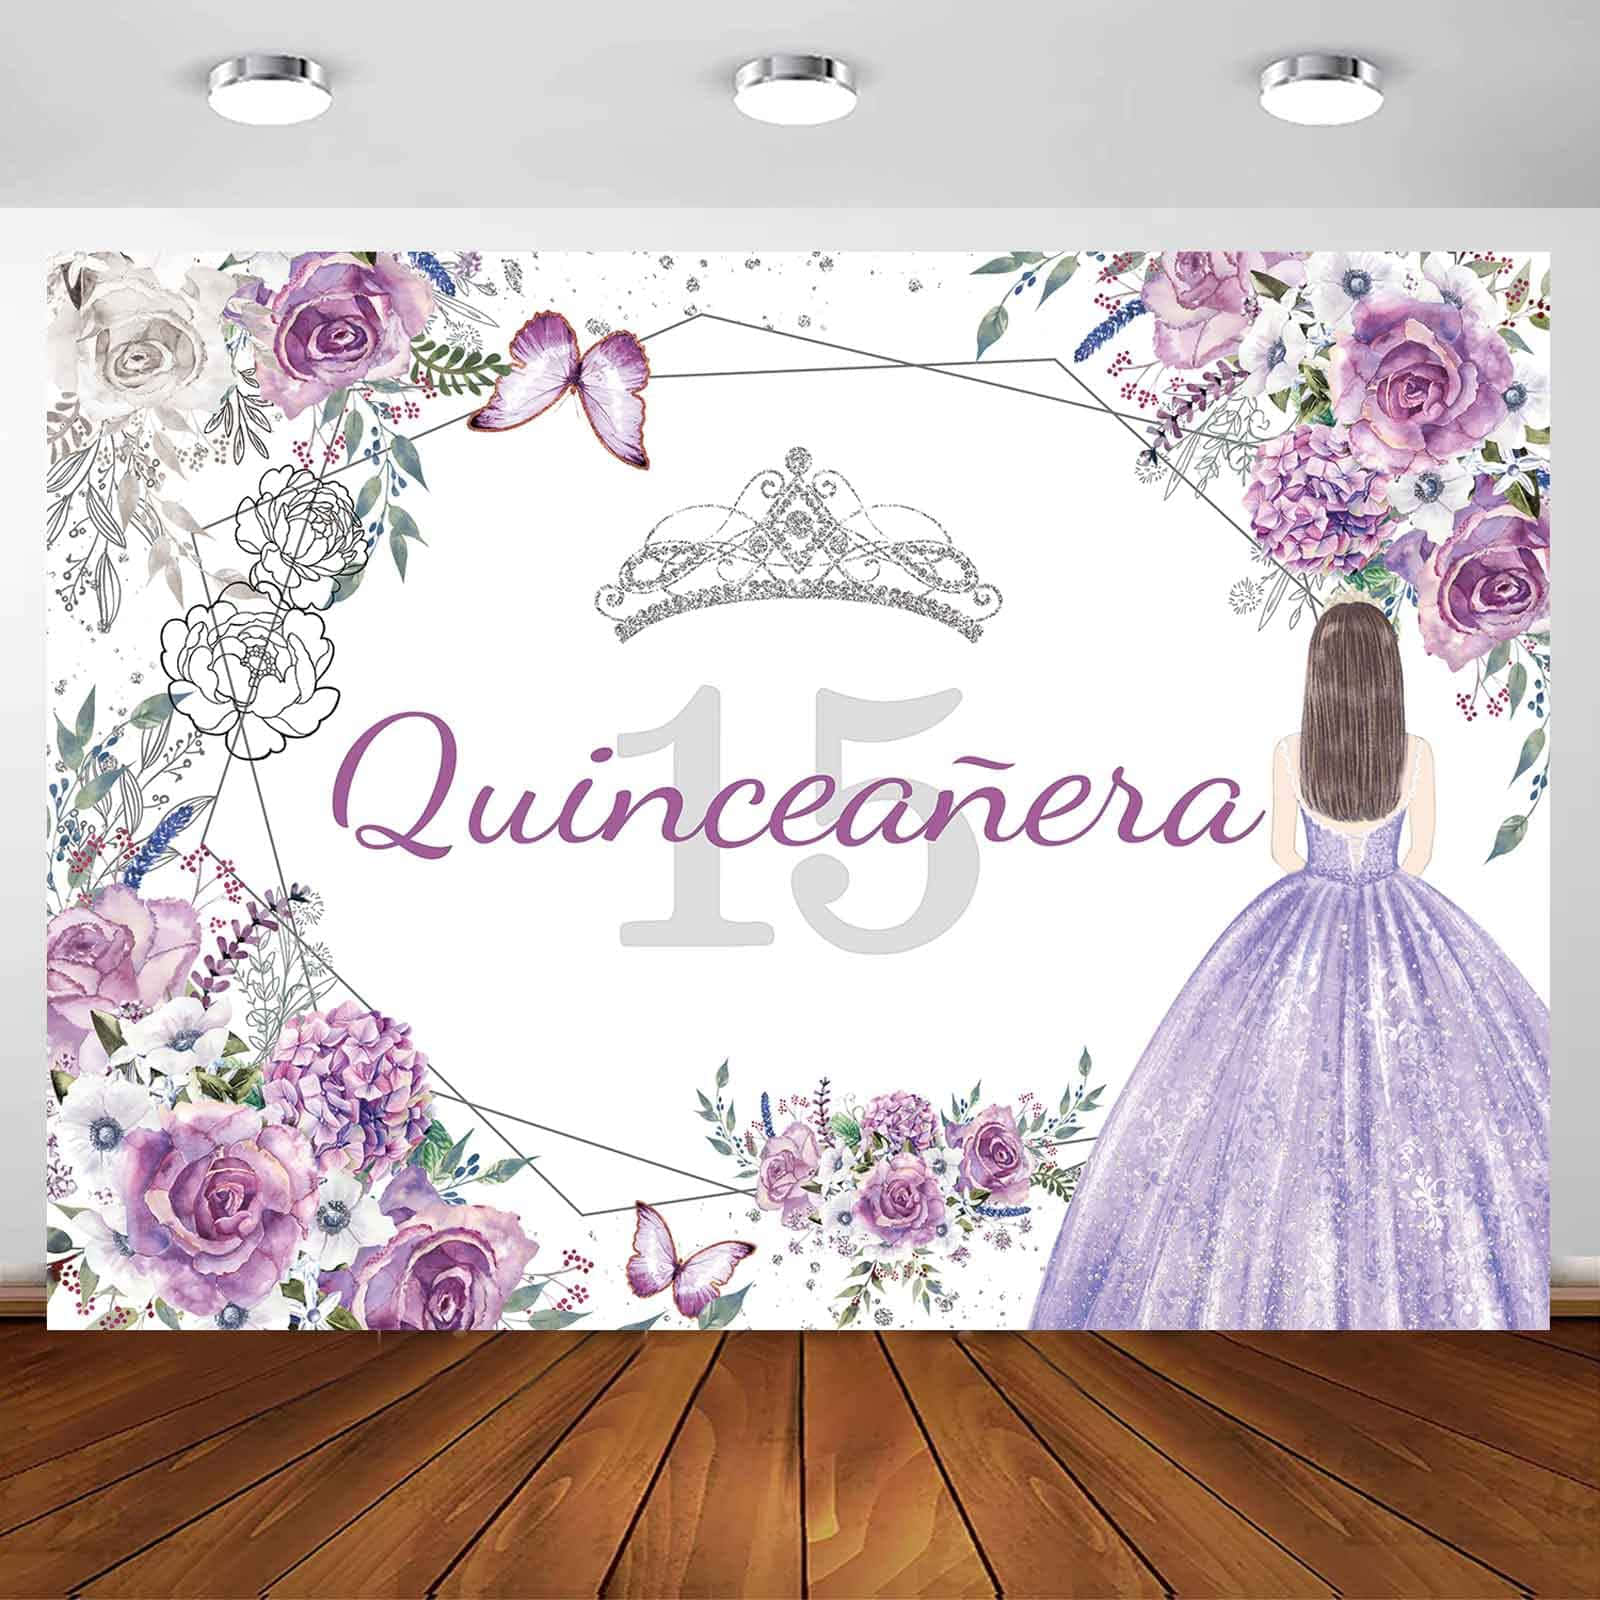 Quinceanera Party Backdrop With Purple Flowers And A Girl In A Dress